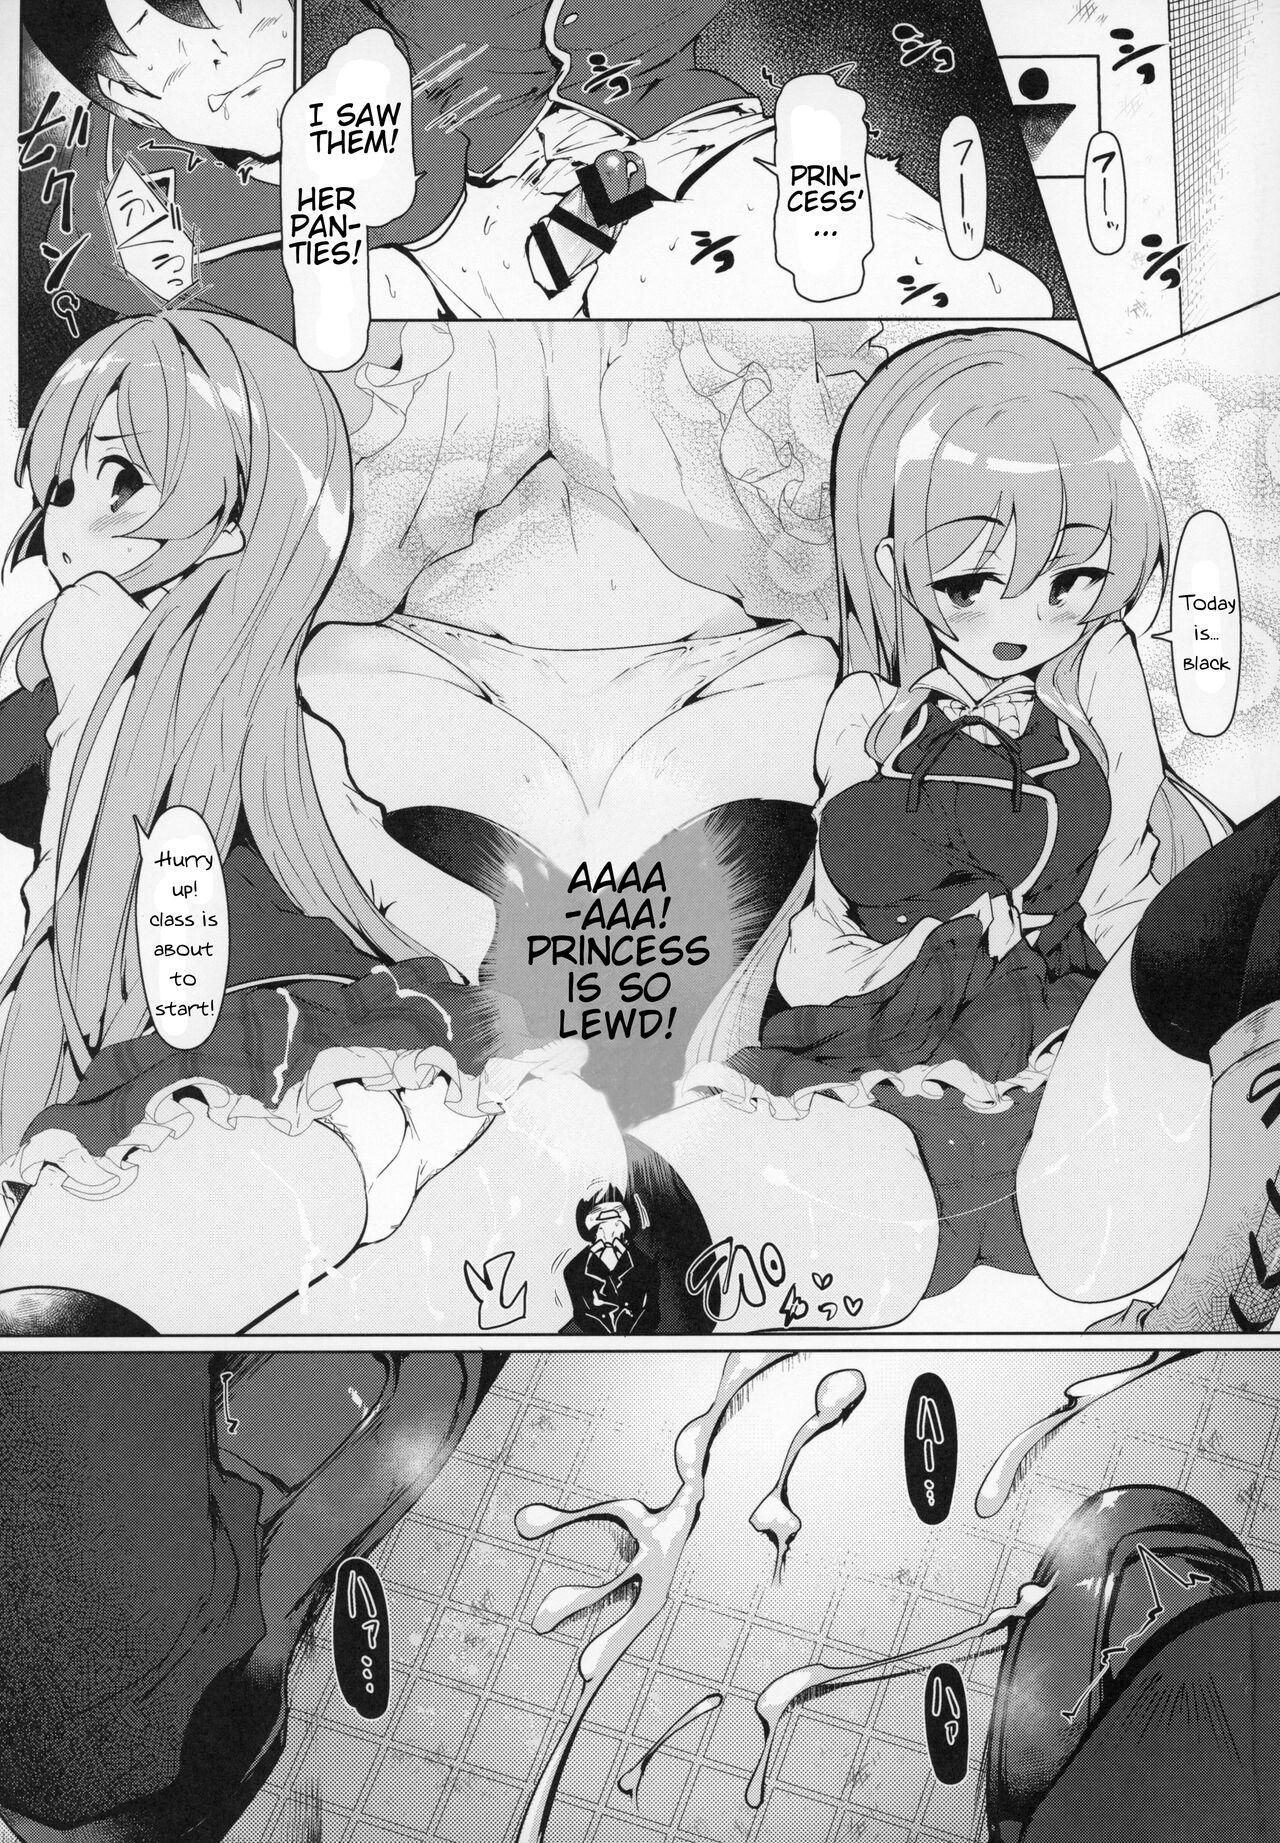 Doggystyle There's No Way An Ecchi Event Will Happen Between Me and the Princess of Manaria Kingdom! - Manaria friends Teenage Sex - Page 6